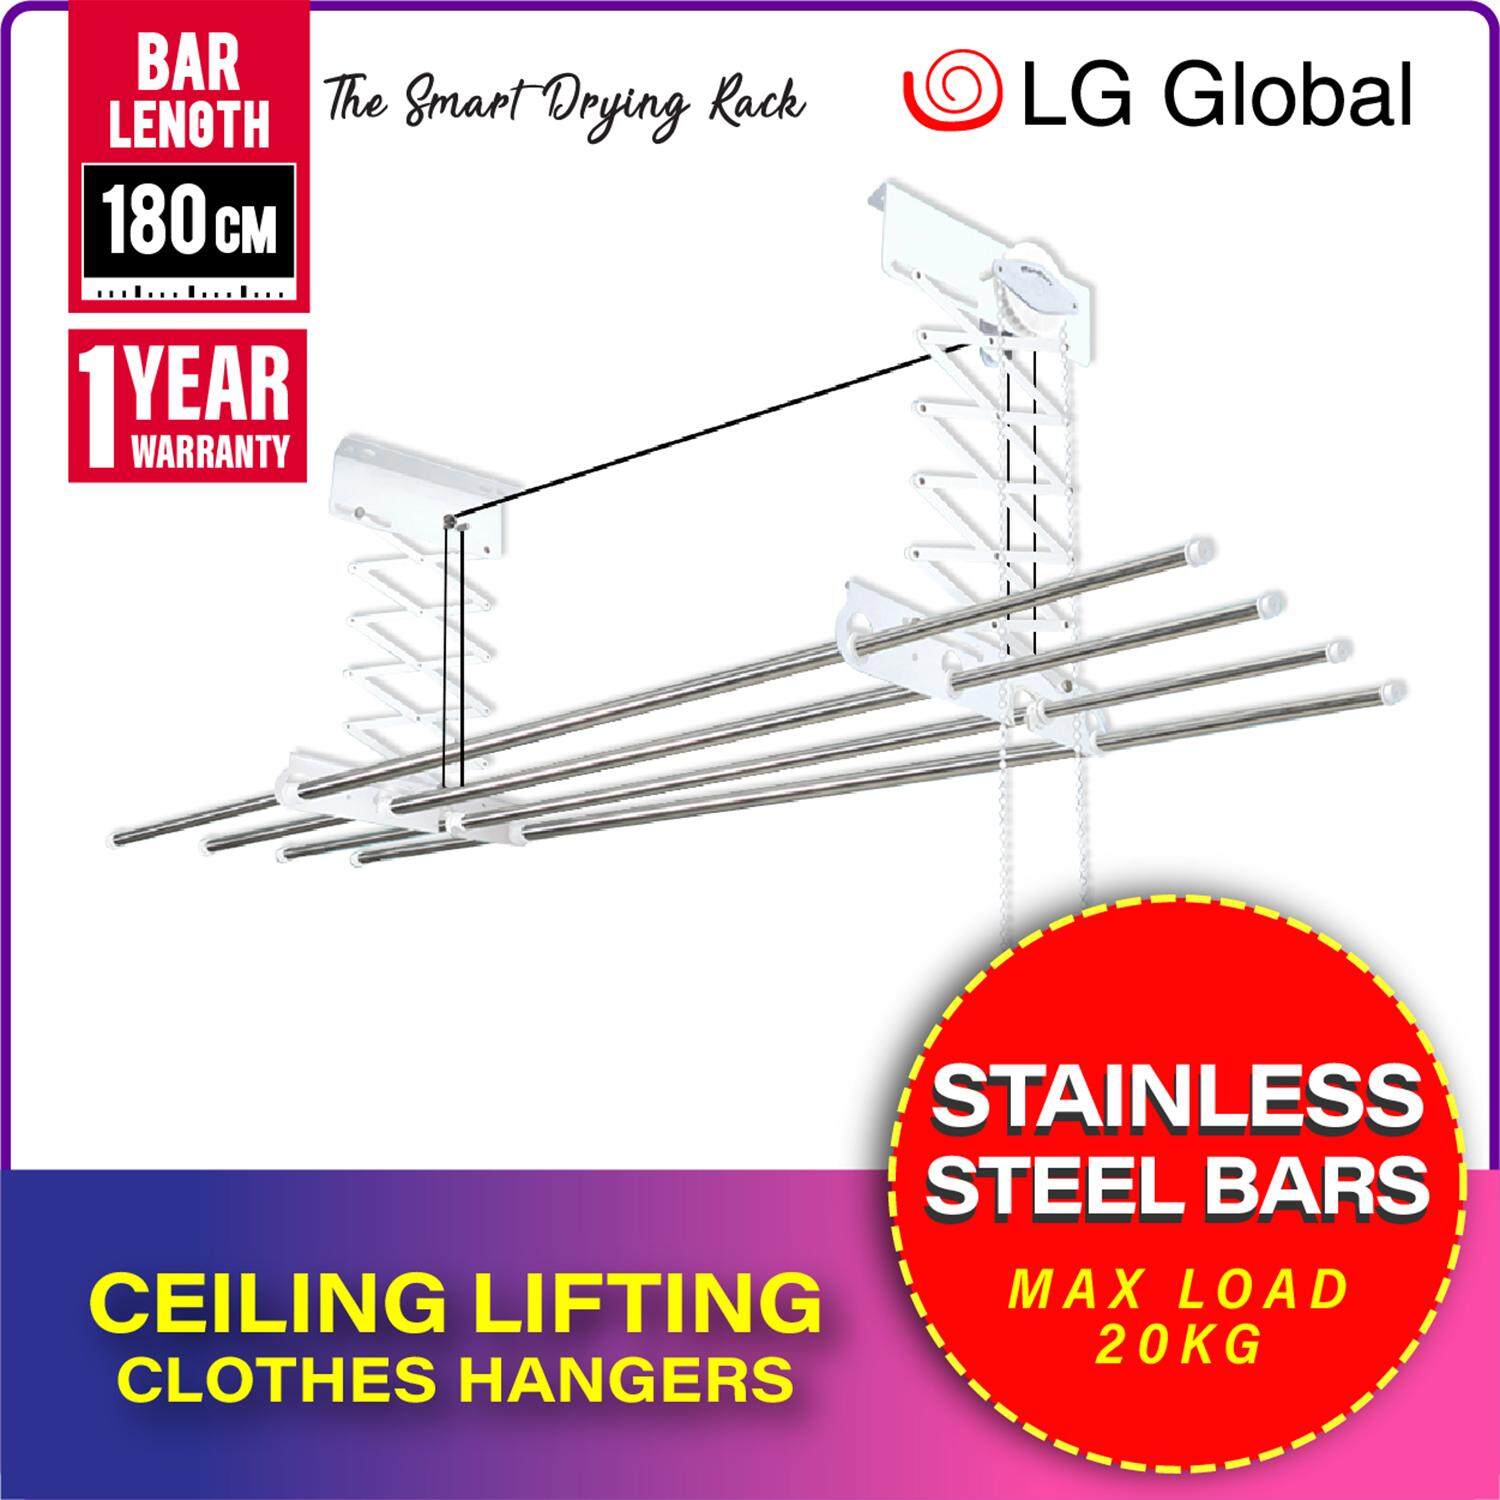 Lg Global Automatic Drying Rack Ceiling